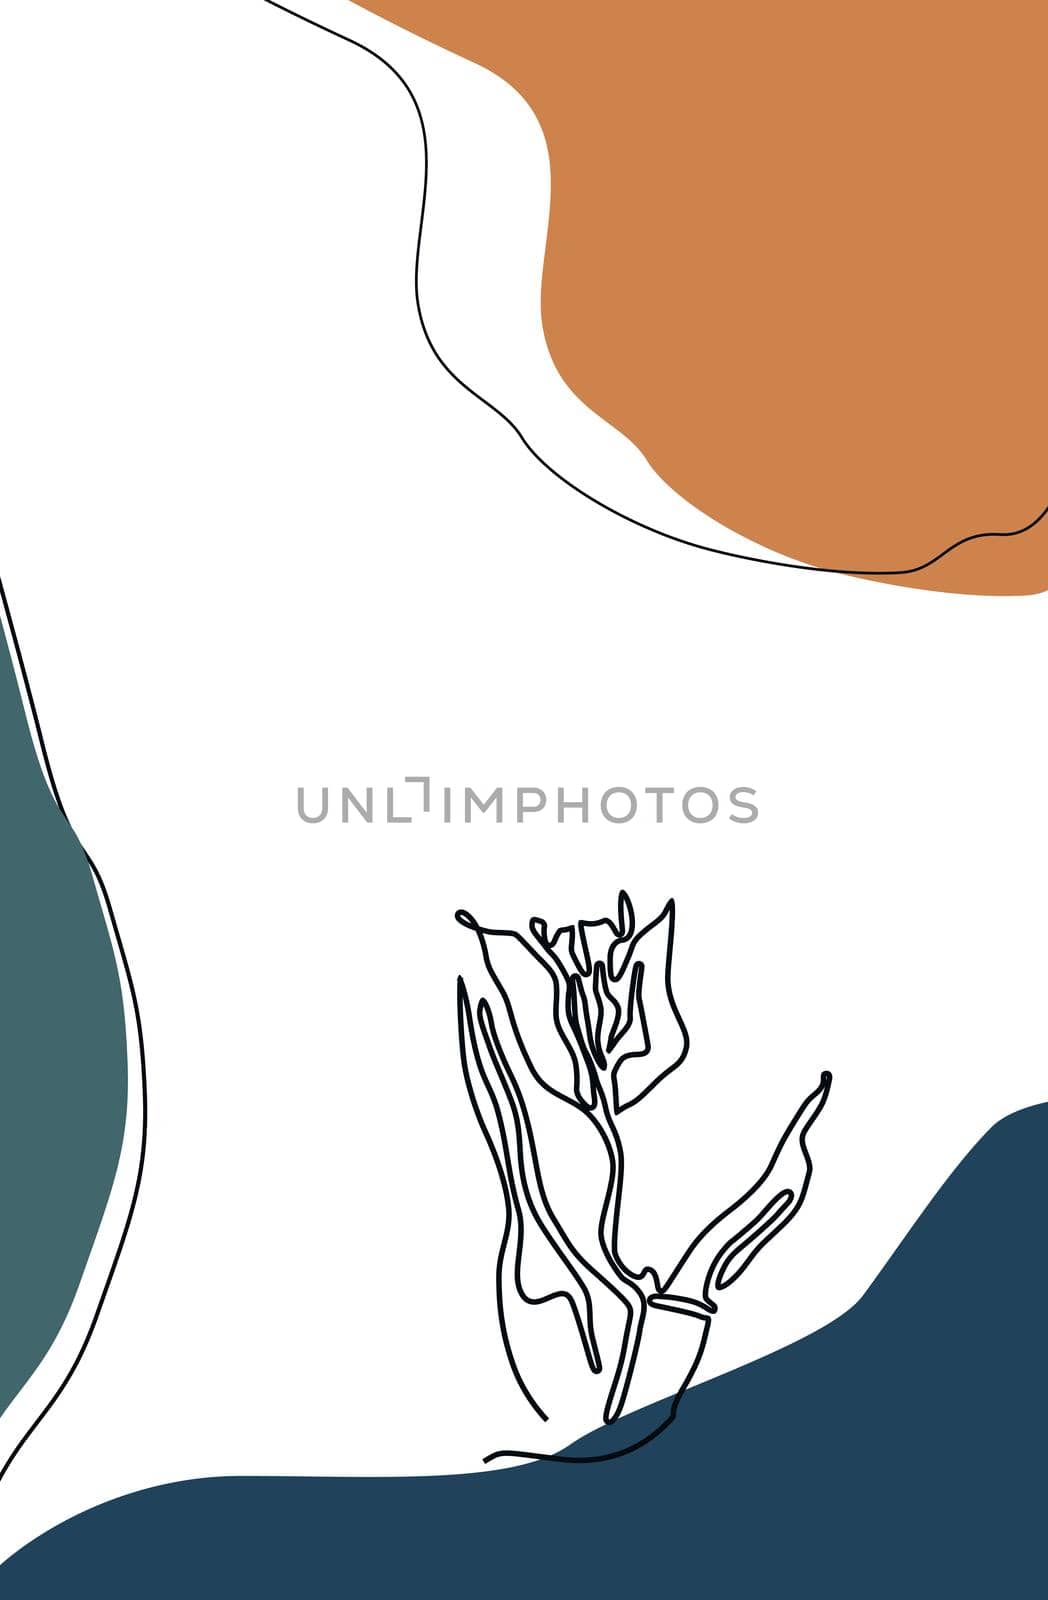 Abstract illustration with single unbroken line drawing of tulip flower on white, blue and brown background. Art pattern, simple doodle example